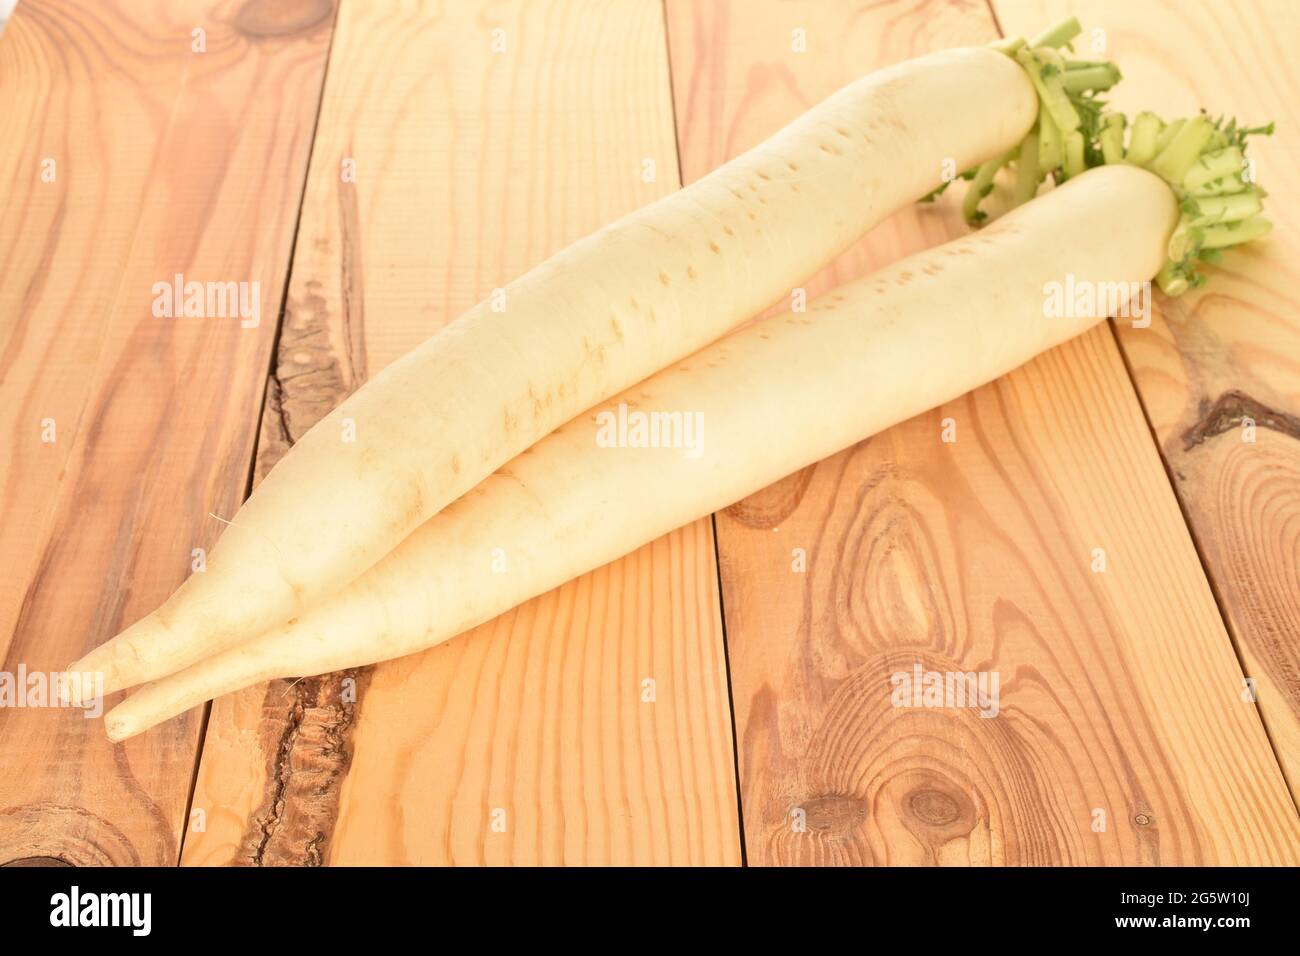 Two ripe organic radishes, close-up, on a wooden table. Stock Photo